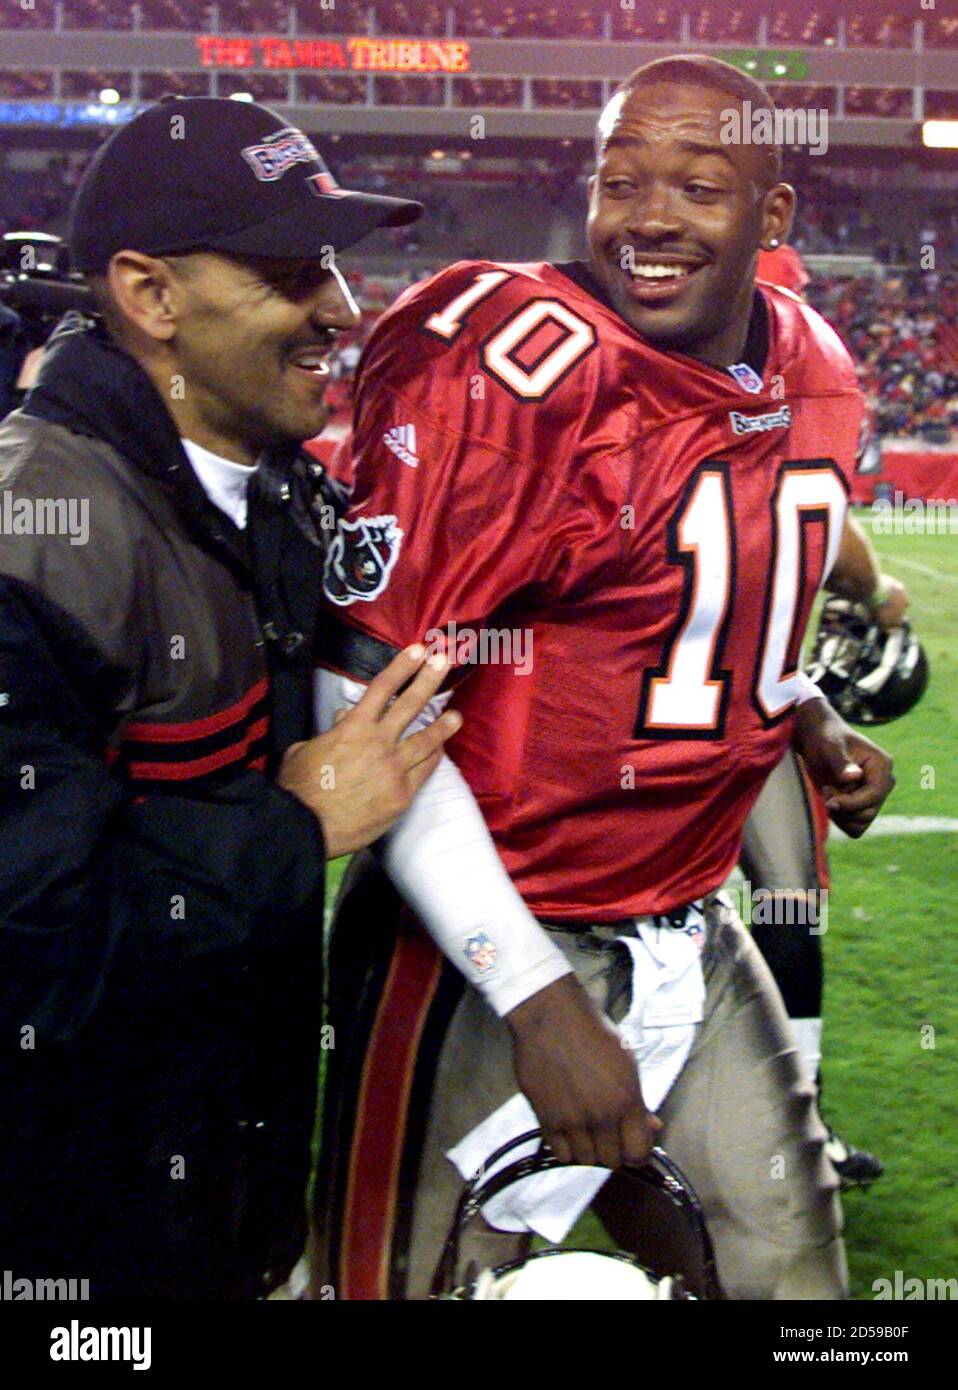 Tampa Bay Buccaneers' rookie quarterback Shaun King (R) celebrates with  head coach Tony Dungy (L) after the Bucs secured a playoff spot with a  29-10 win over the Green Bay Packers, December